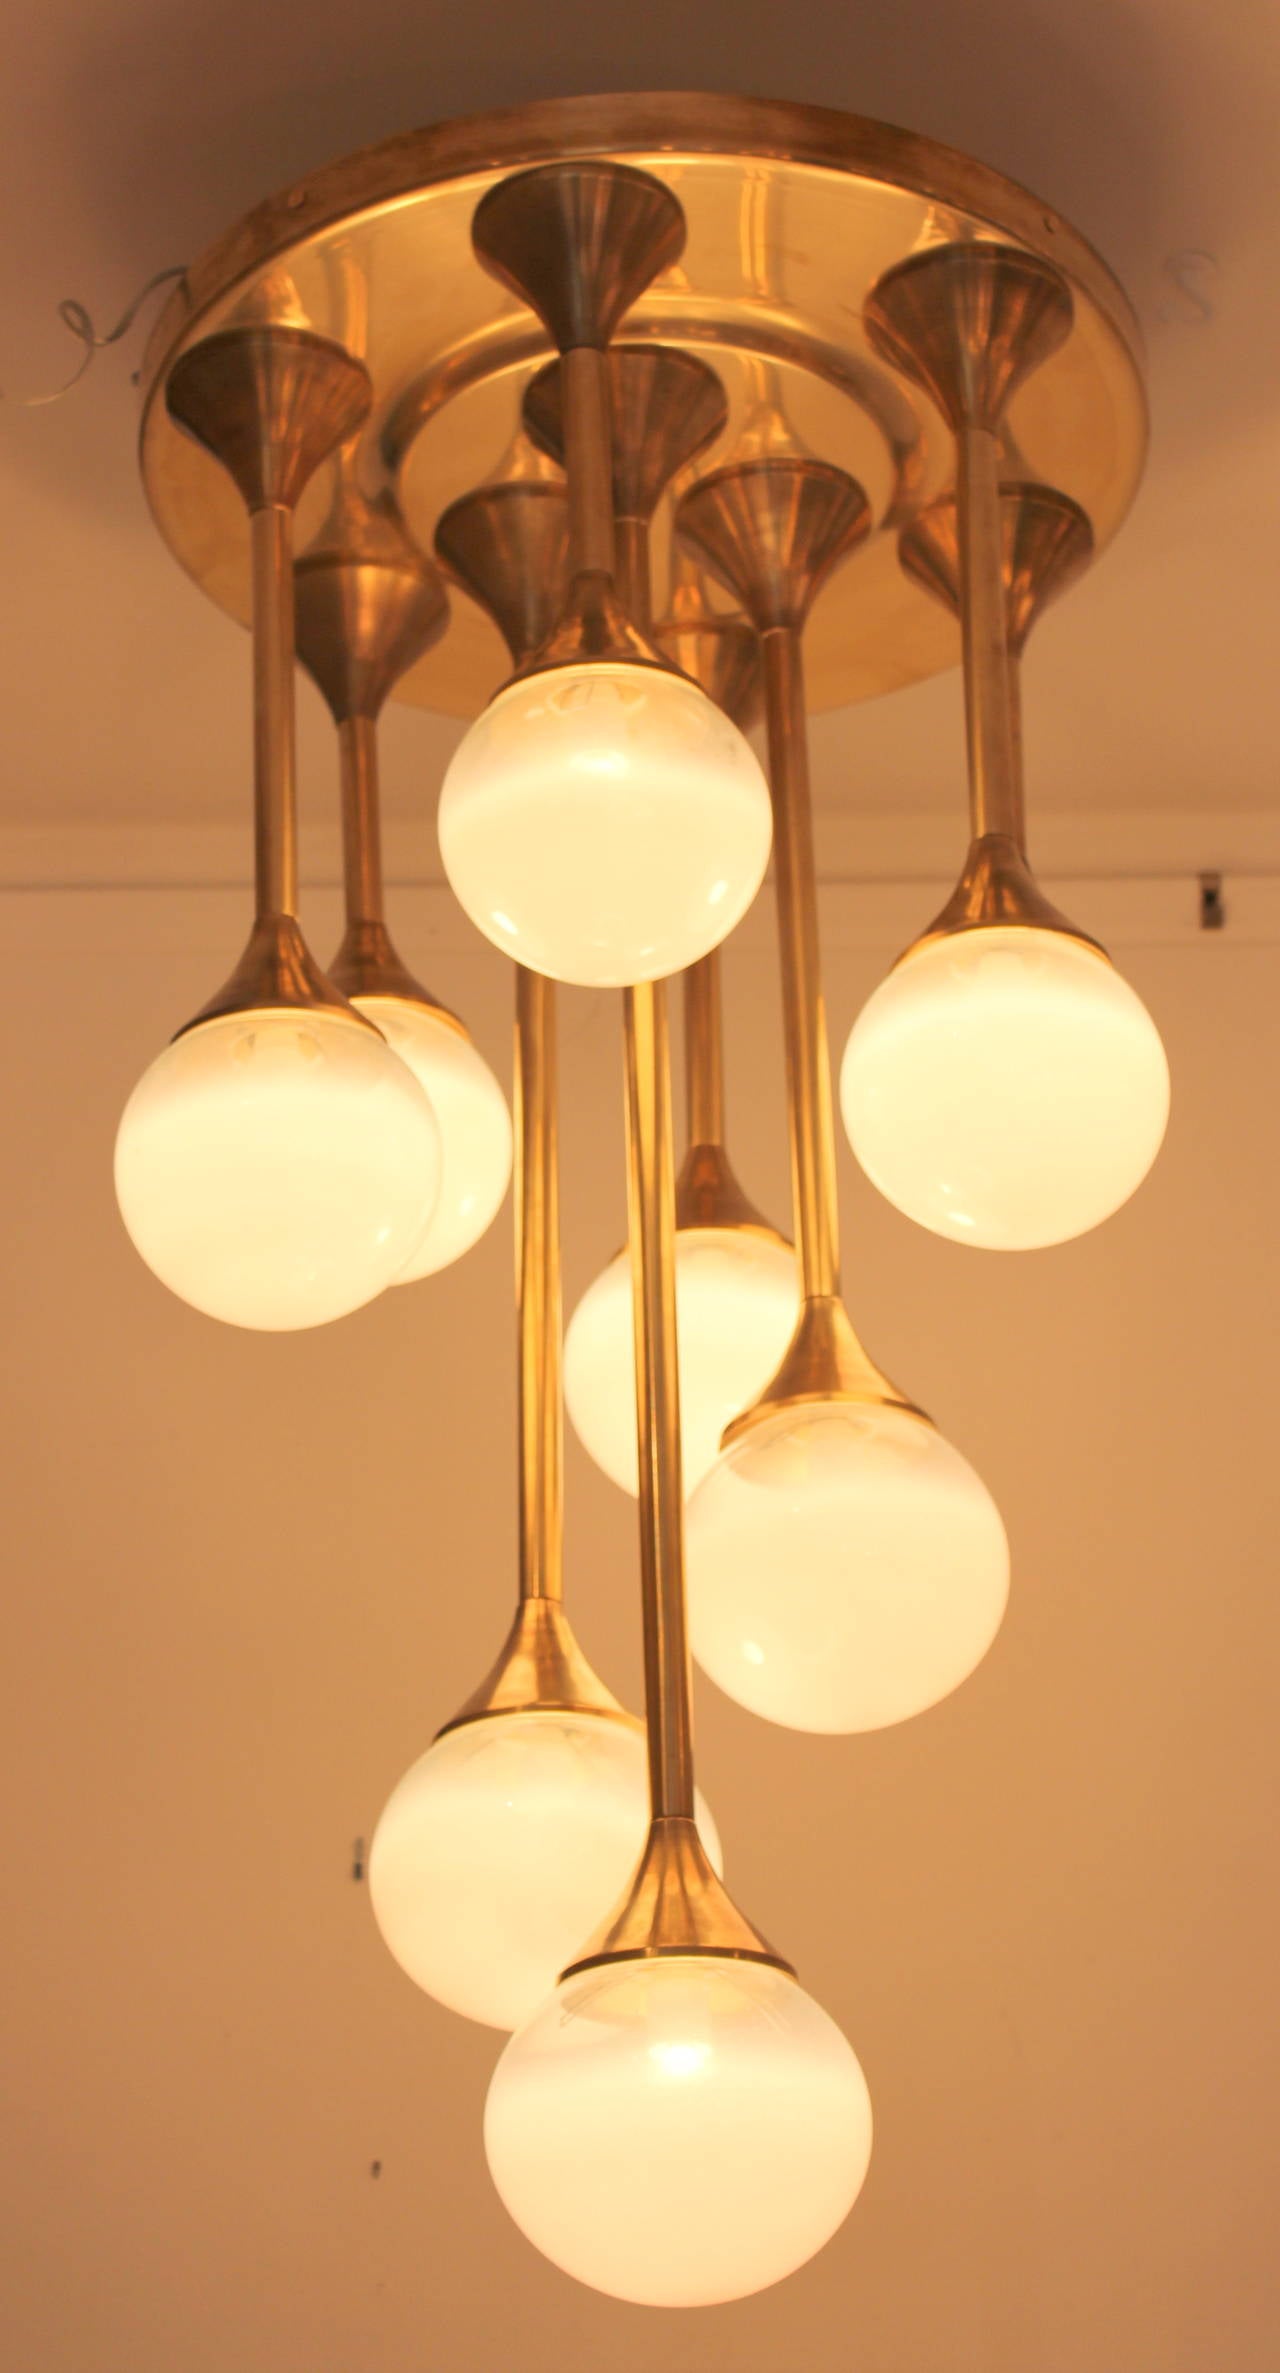 Targetti Sankey Chandelier, Italy  1960s with hand blown glass shades .  Brass
Rewired for US .